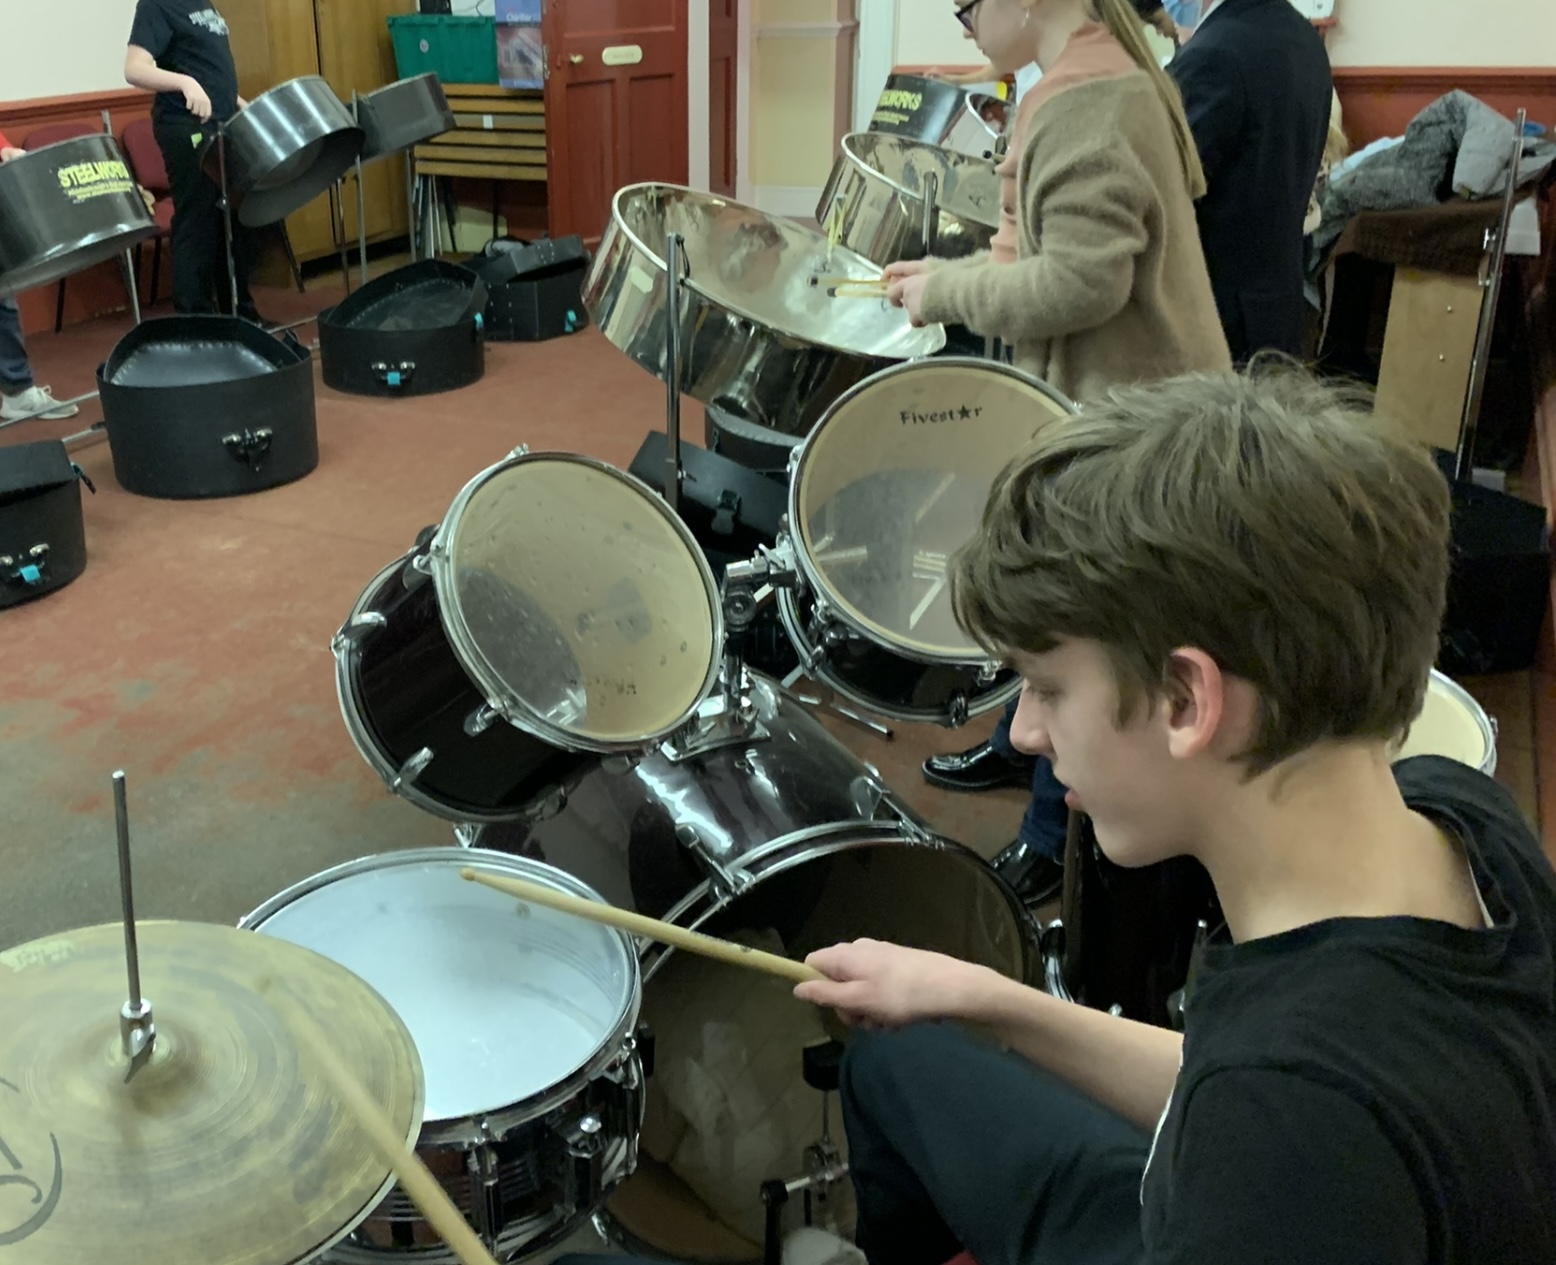 a young boy plays the drums